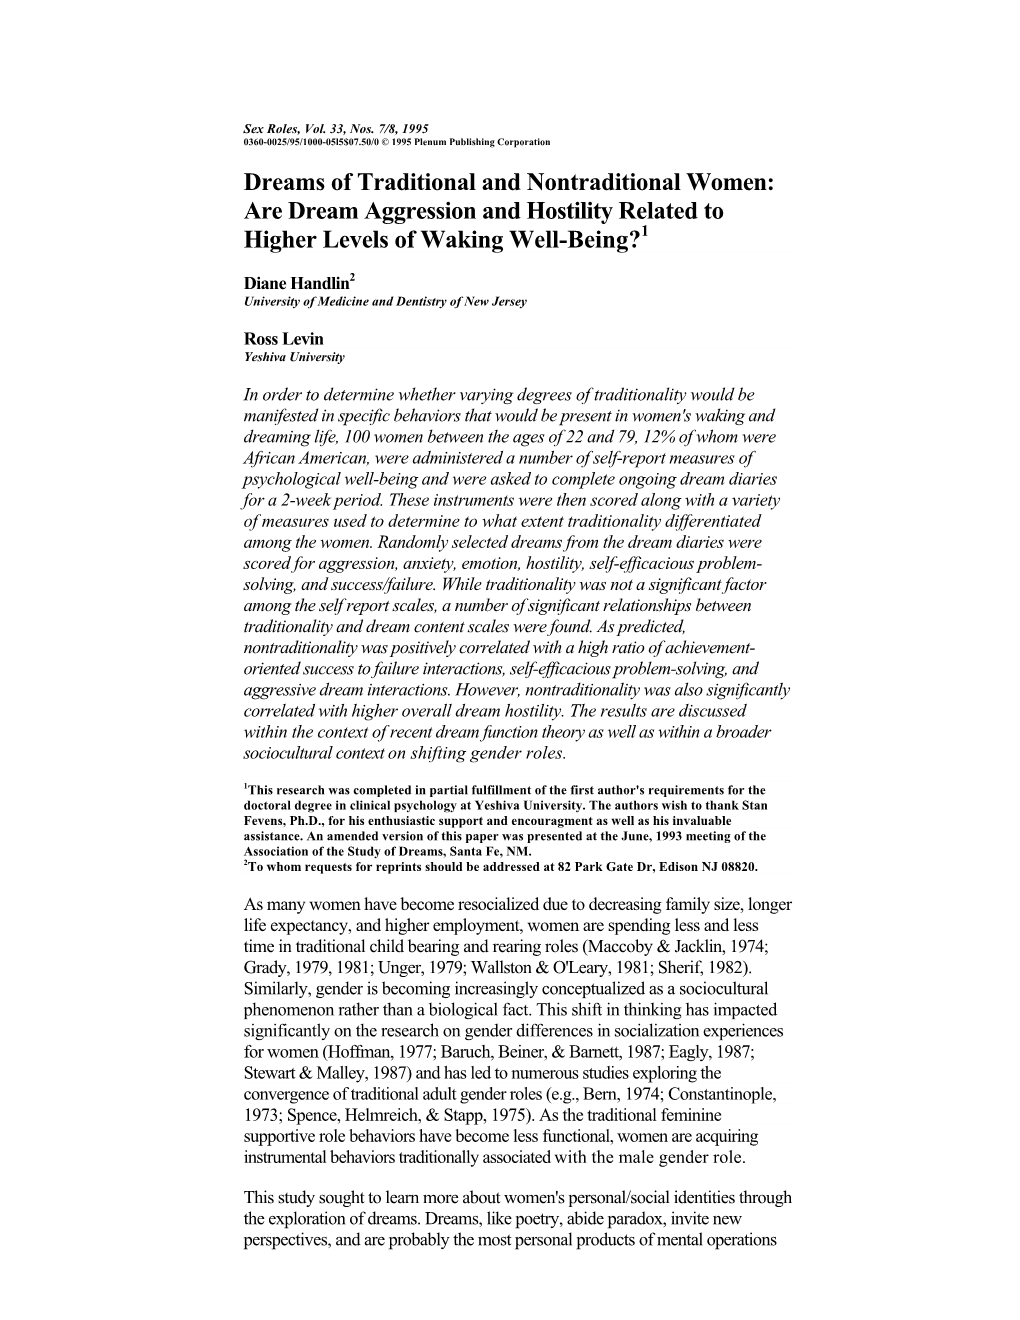 Dreams of Traditional and Nontraditional Women: Are Dream Aggression and Hostility Related to Higher Levels of Waking Well-Being?1